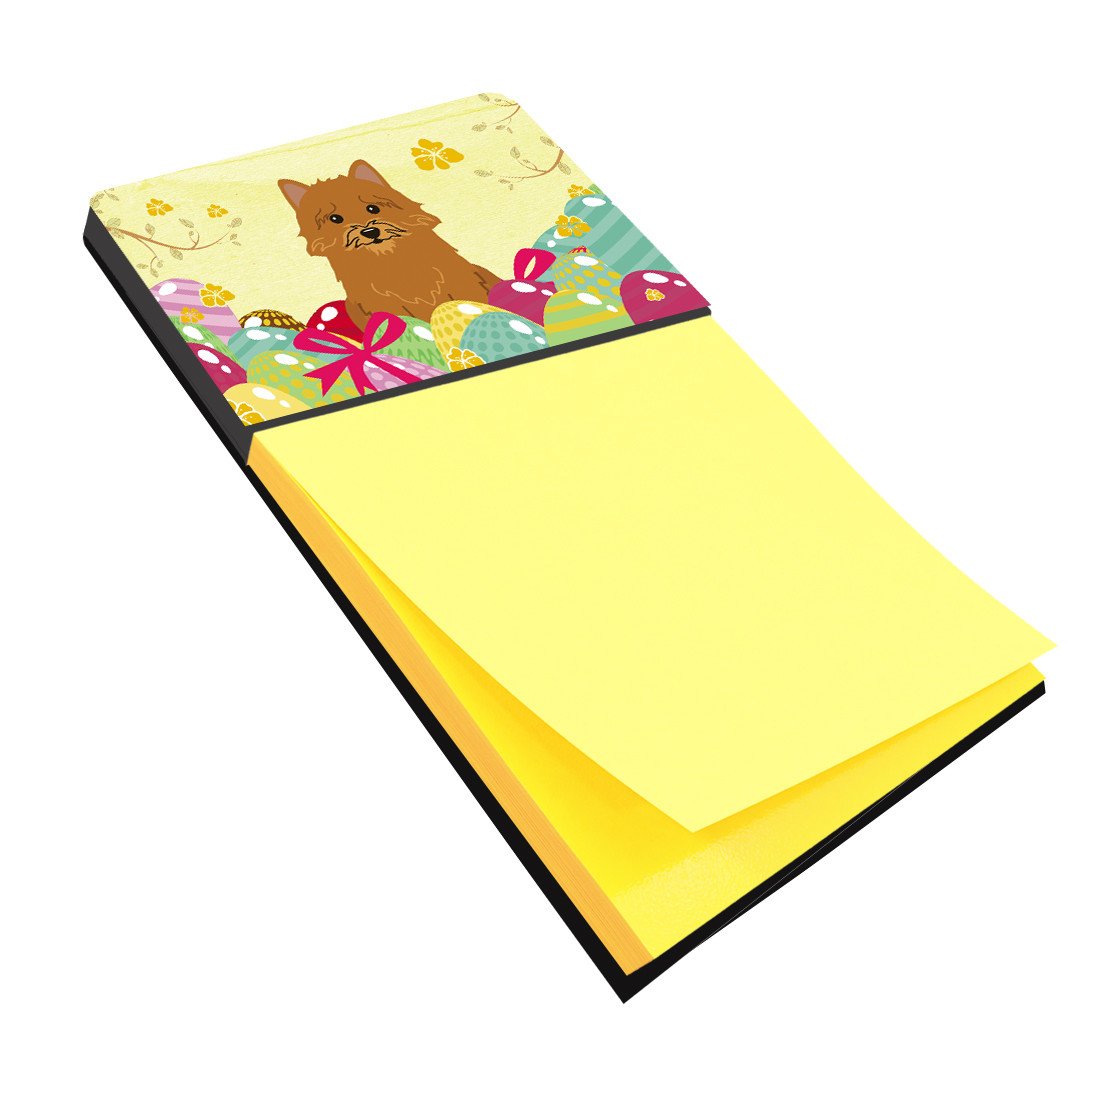 Easter Eggs Norwich Terrier Sticky Note Holder BB6020SN by Caroline's Treasures